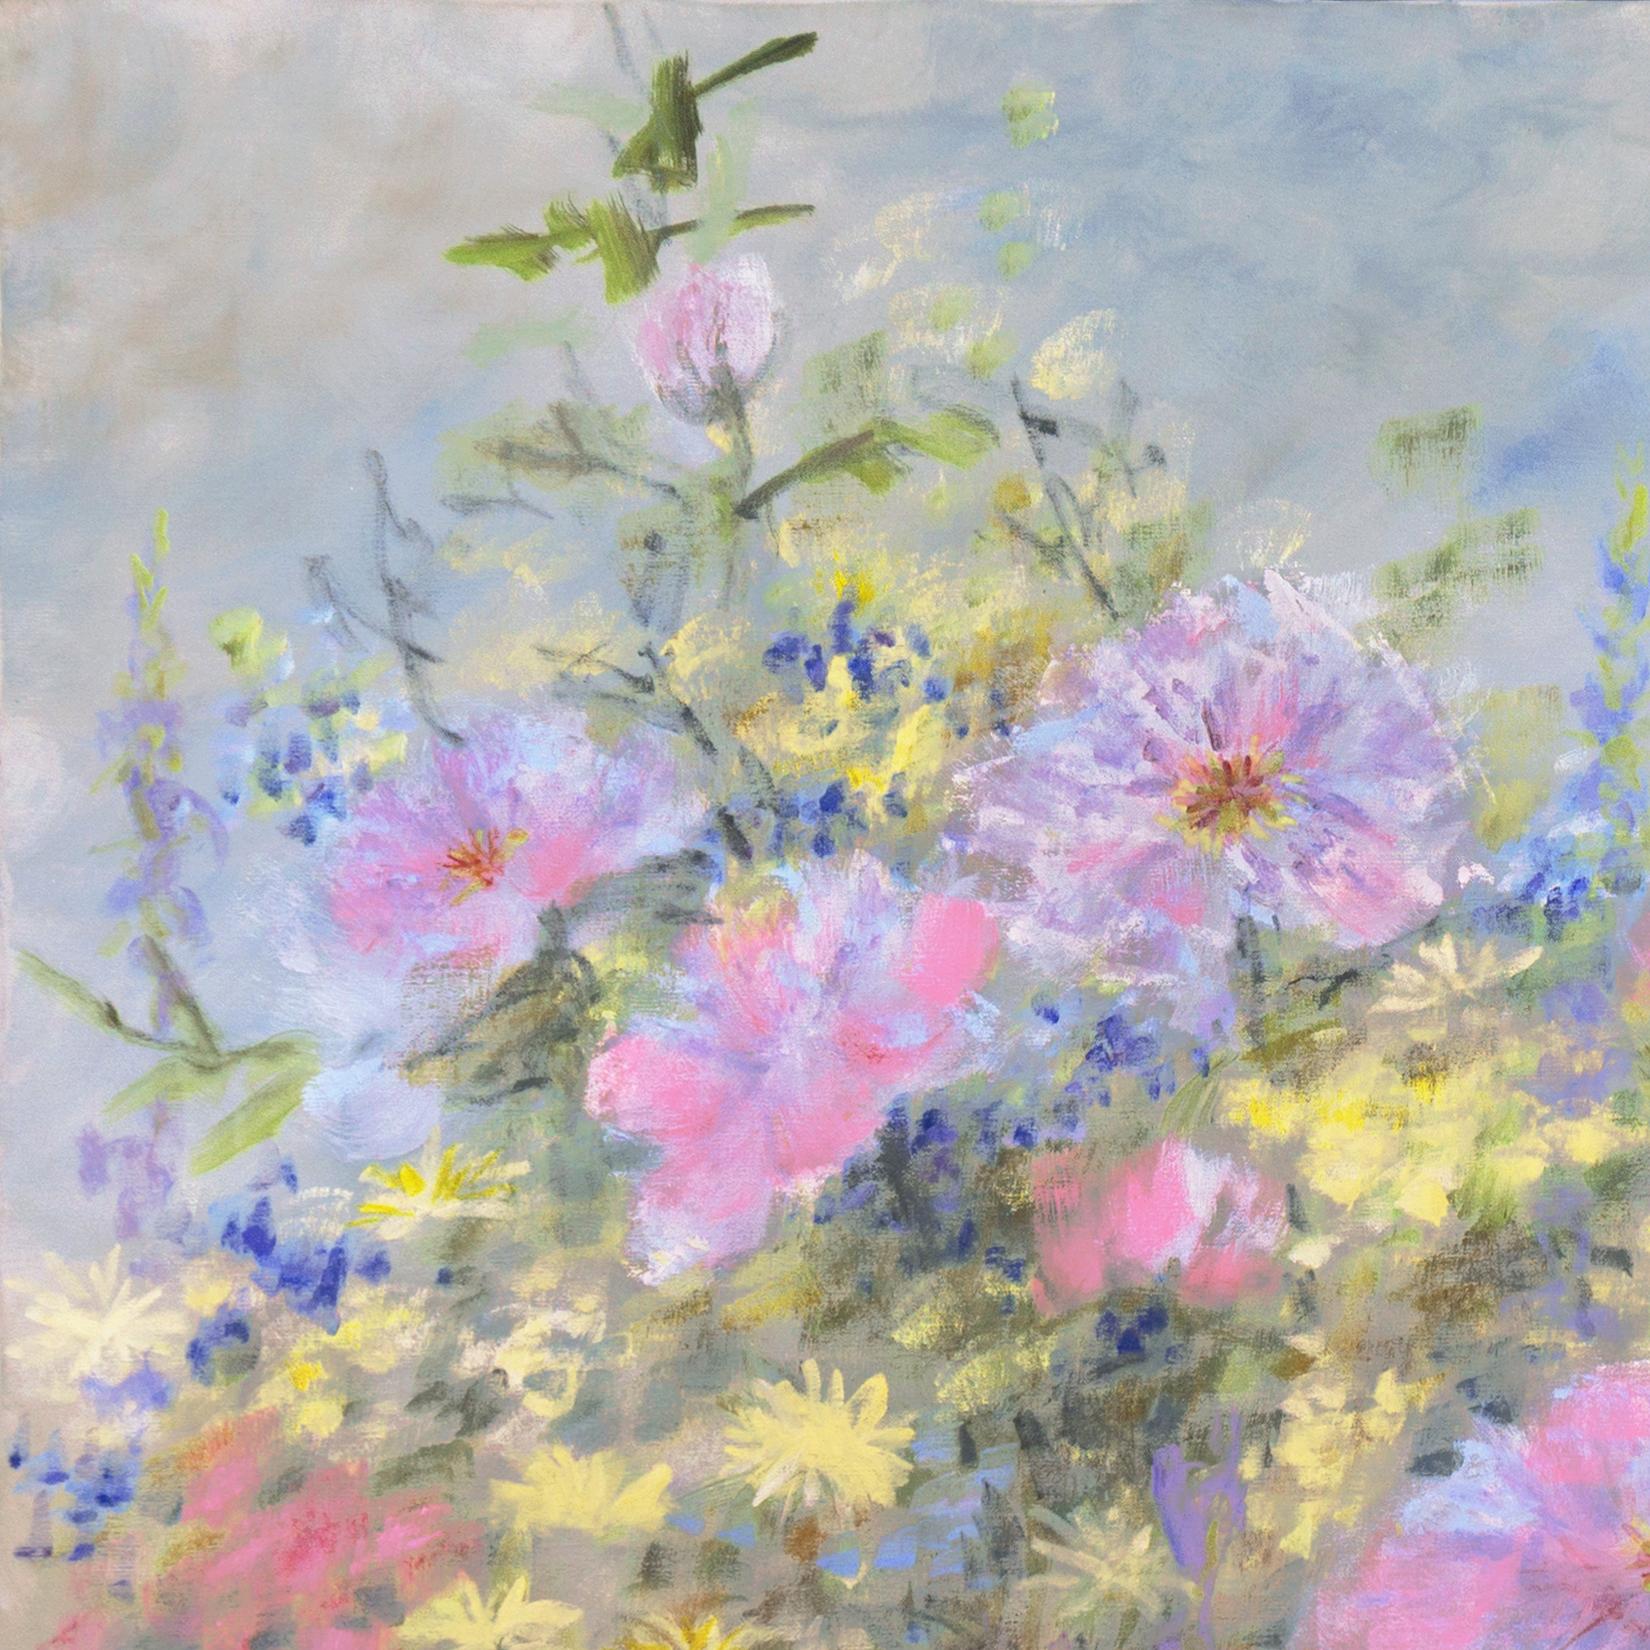 Signed lower right, 'R. Bothwell' (American, 20th century) and painted circa 1975.
Framed dimensions: 37 x 1.5 x 49 inches.  

A substantial, American Impressionist oil landscape showing a variety of wild flowers blooming beneath clouded blue skies.